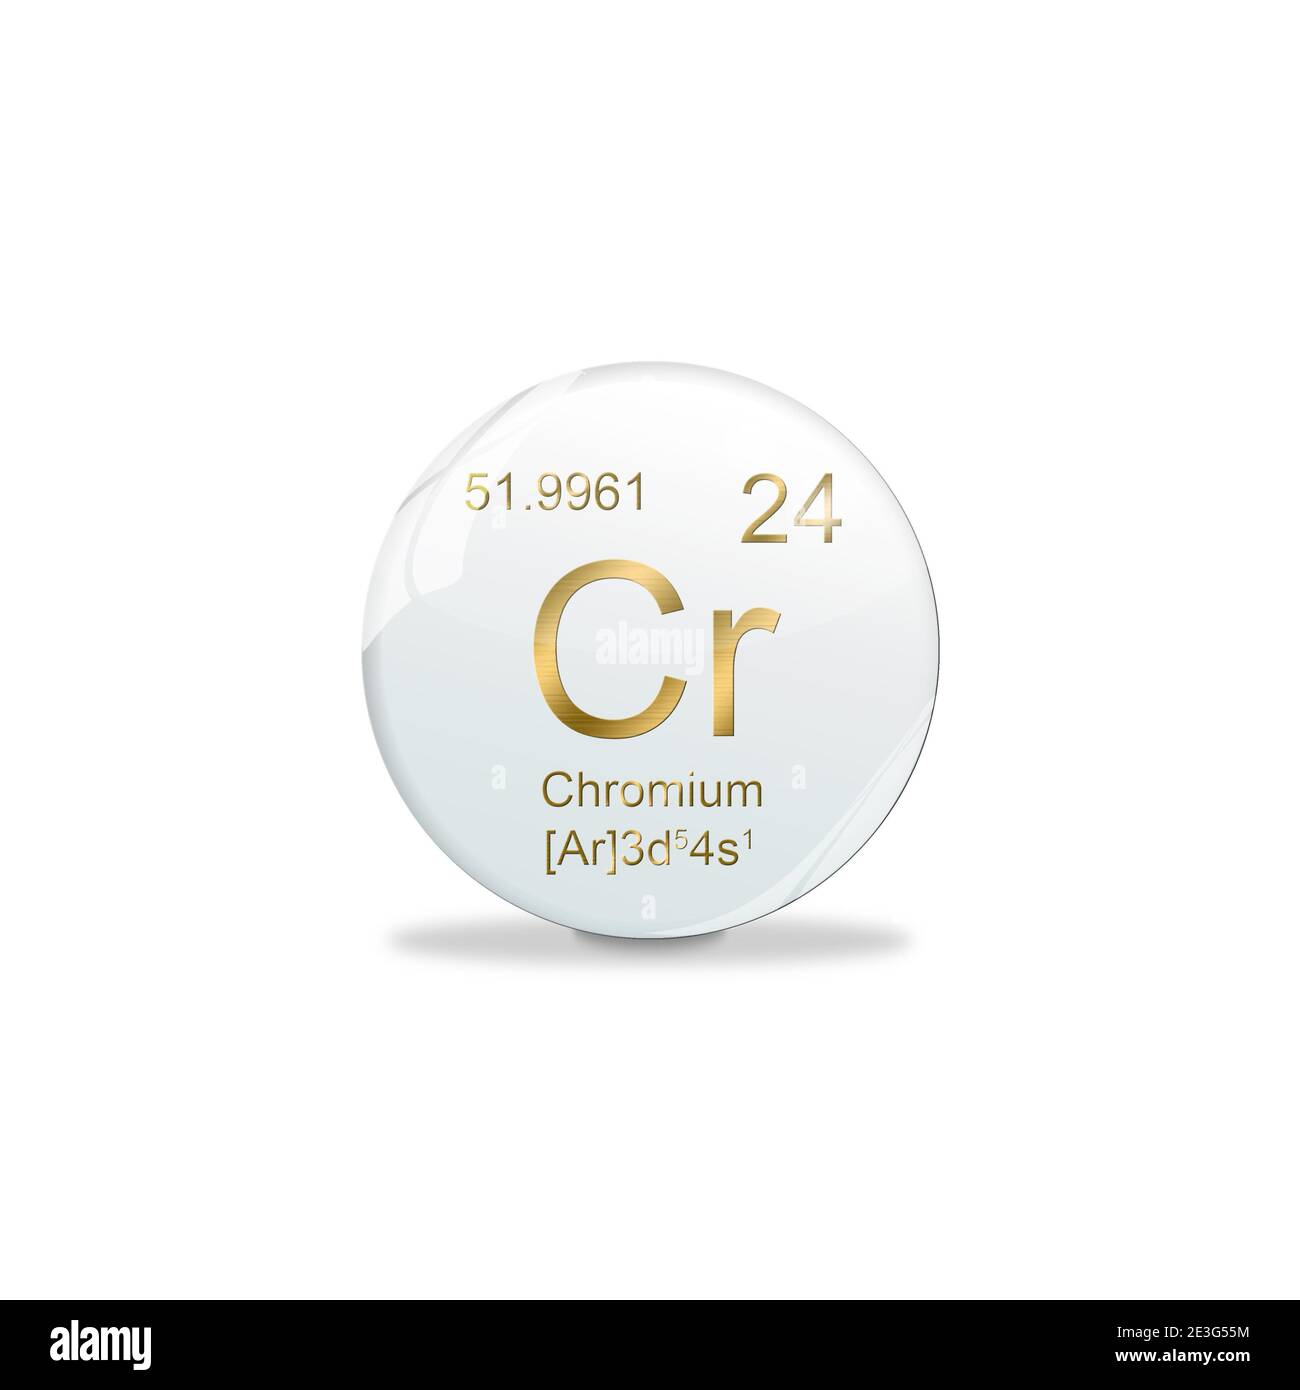 3D-Illustration, Chromium symbol - Cr. Element of the periodic table on white ball with golden signs. White background Stock Photo